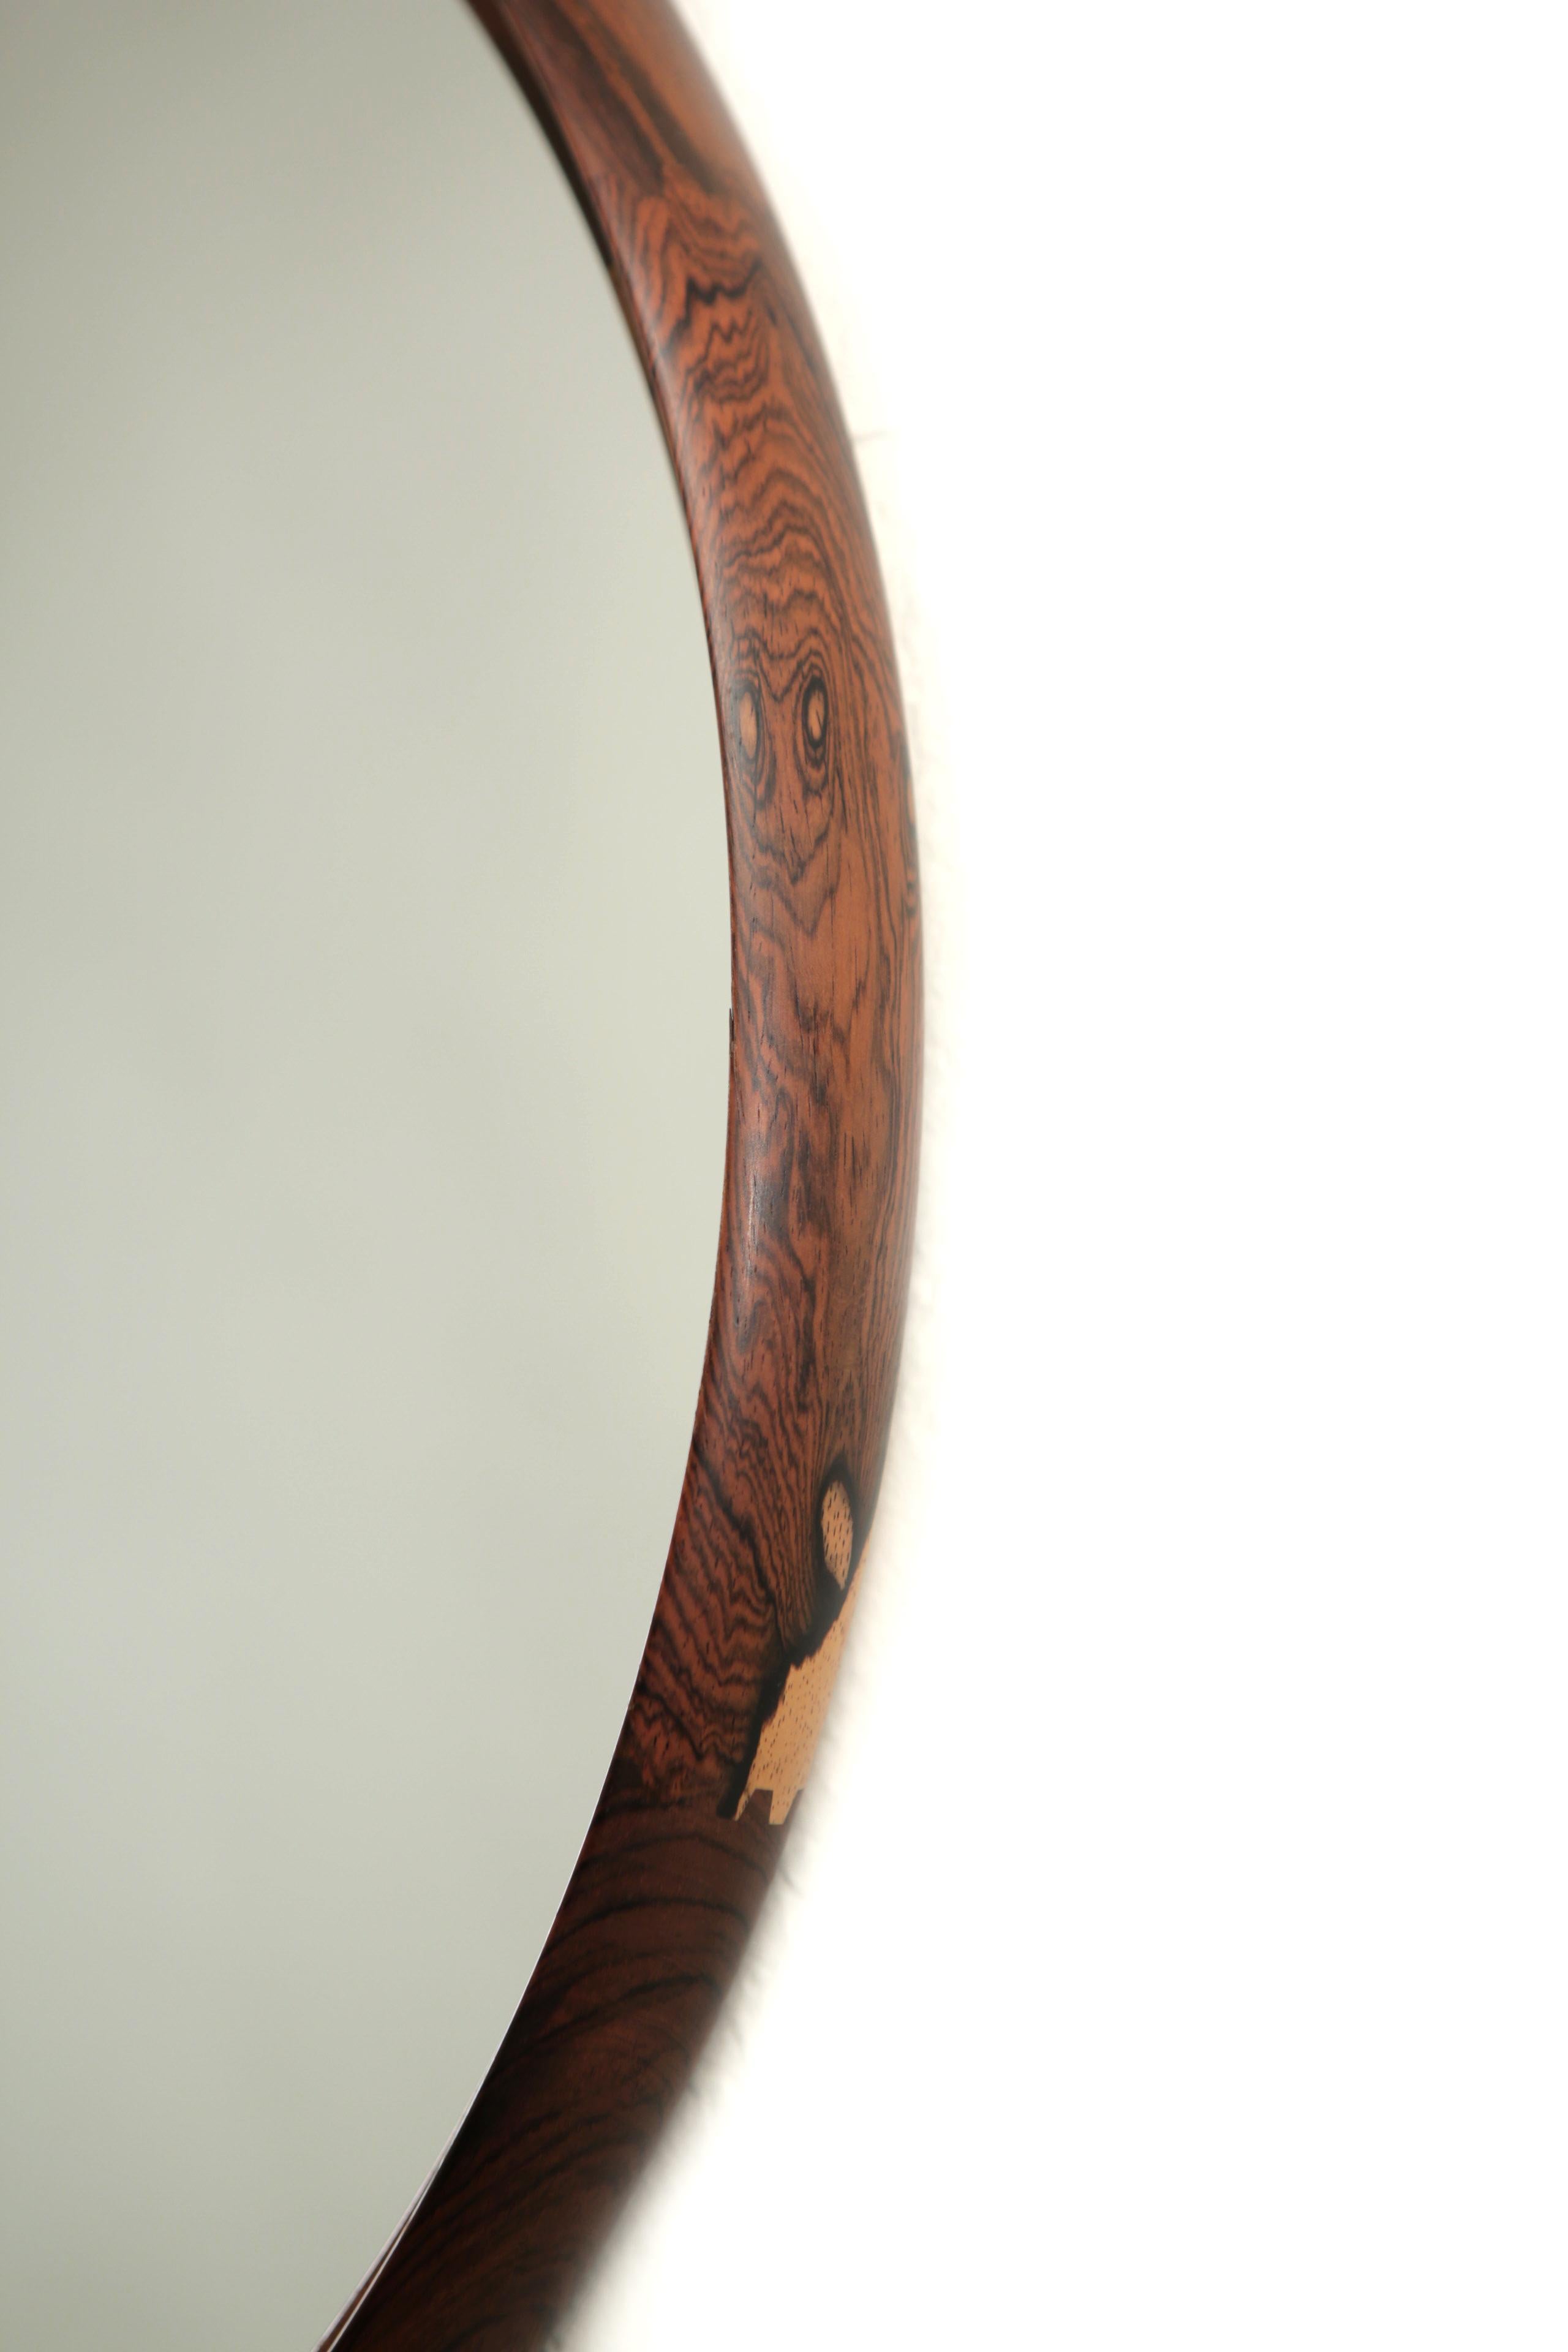 Uno & Östen Kristiansson, Round Rosewood mirror by Luxus, Vittsjö. Sweden, 1960s

This stunning vintage round mirror if exquisitely framed in the most amazing rosewood grain. Made in Sweden in the 1960s this is fantastic piece for an entrance way or